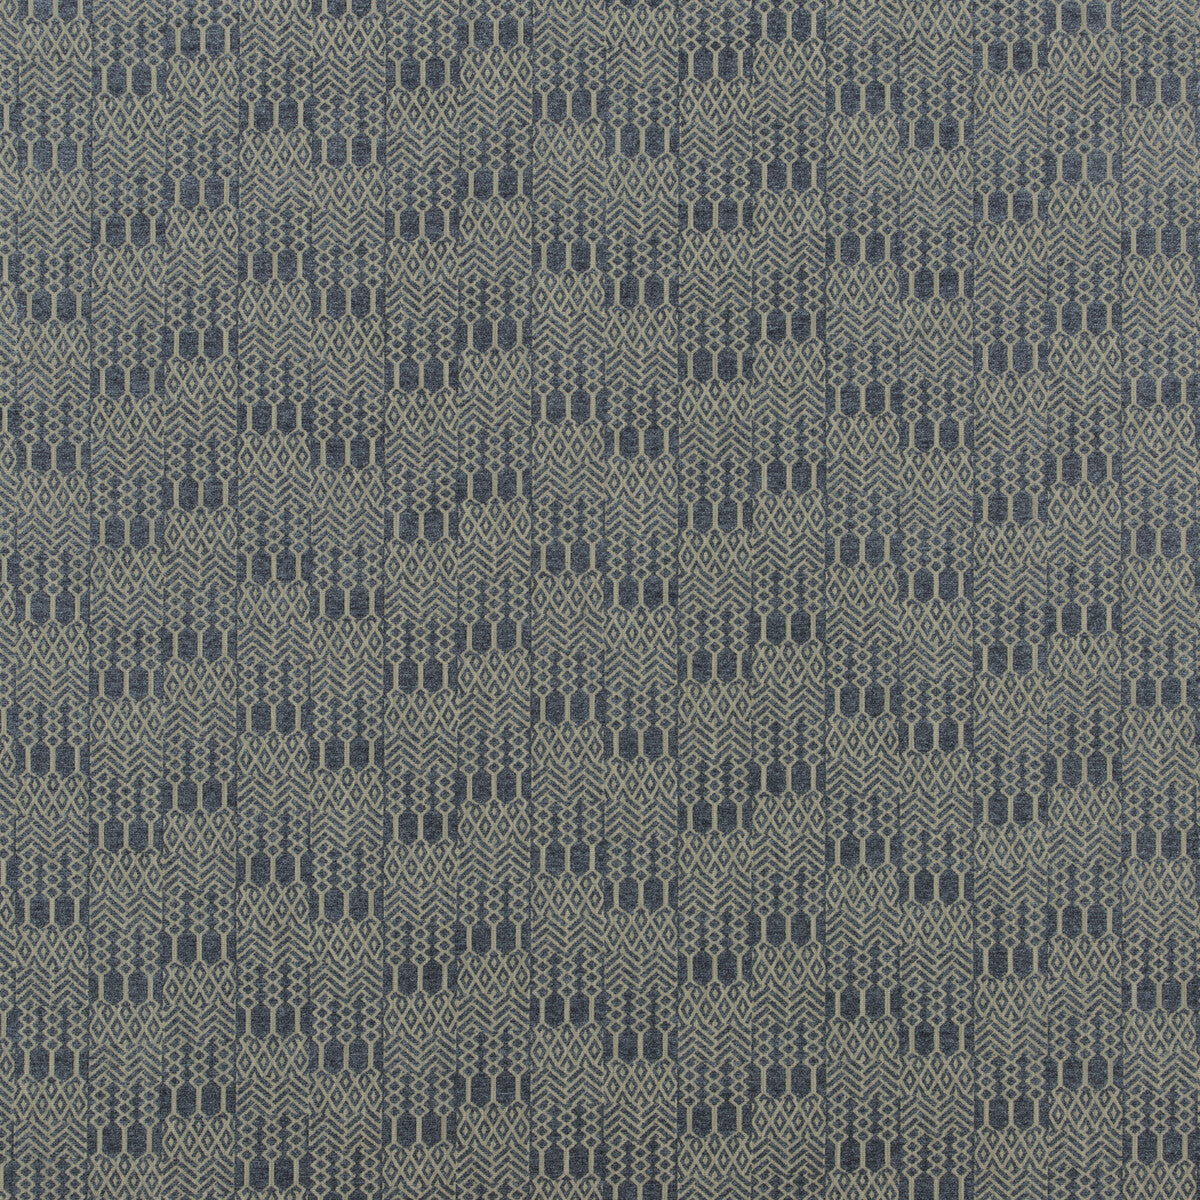 Chimney Weave fabric in sapphire color - pattern BF10674.648.0 - by G P &amp; J Baker in the Historic Royal Palaces collection